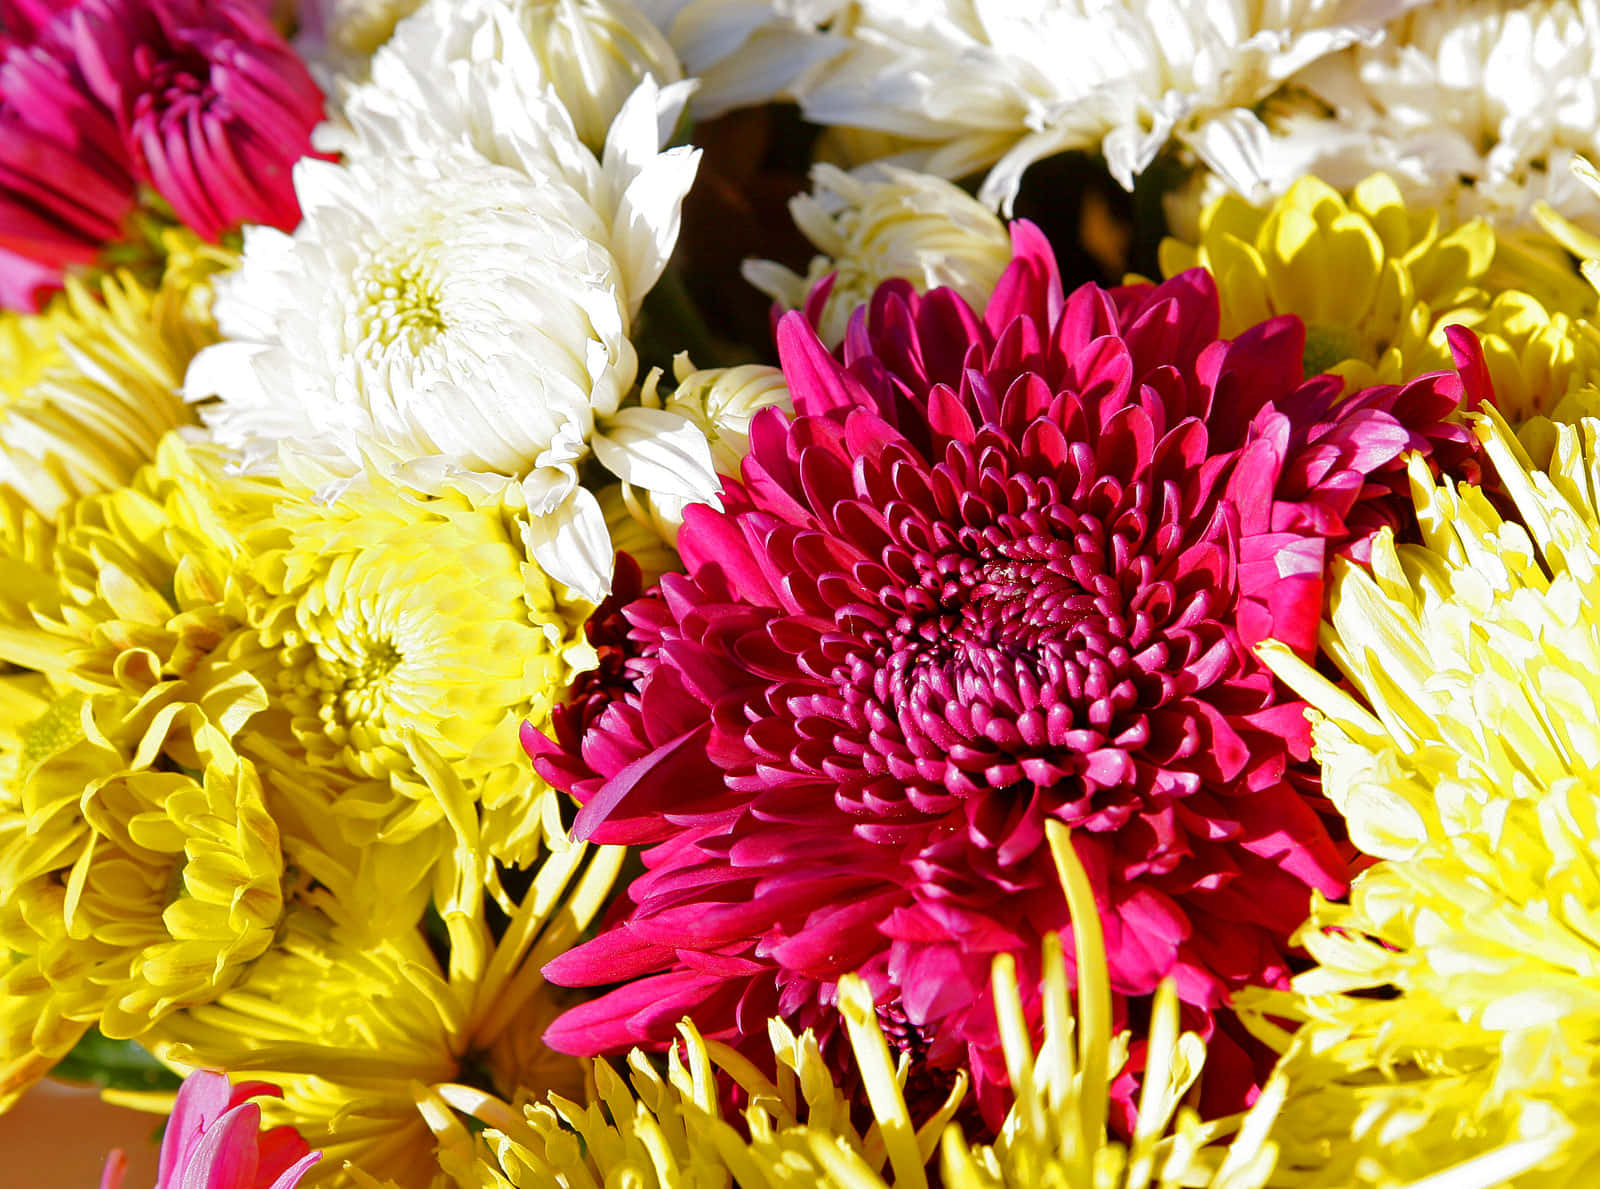 Colorful Chrysanthemum Flowers in a Sunny Garden